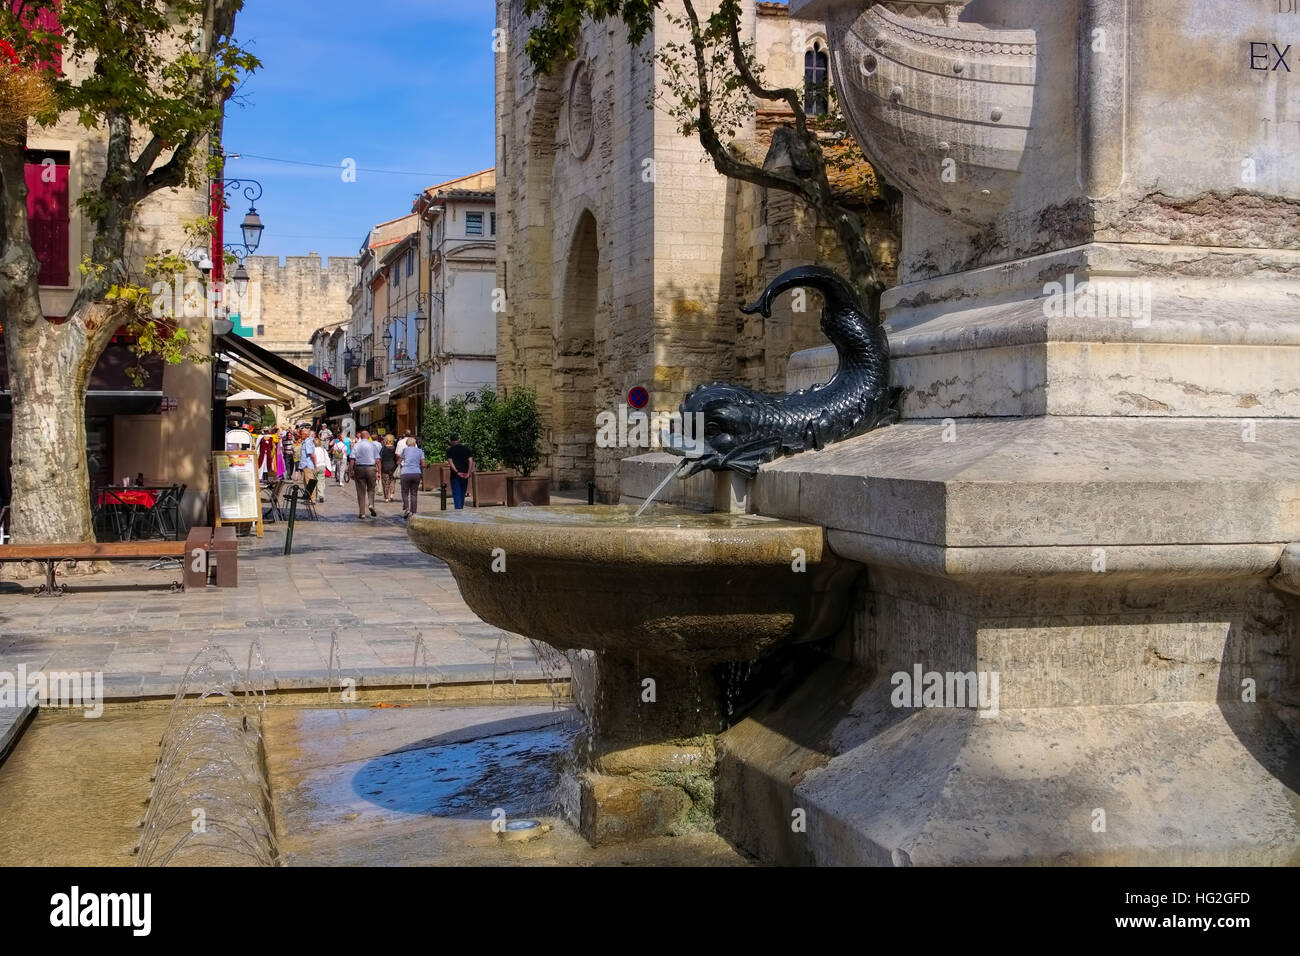 Aigues Mortes Brunnen in der Camargue - Aigues Mortes well in Camargue, France Stock Photo